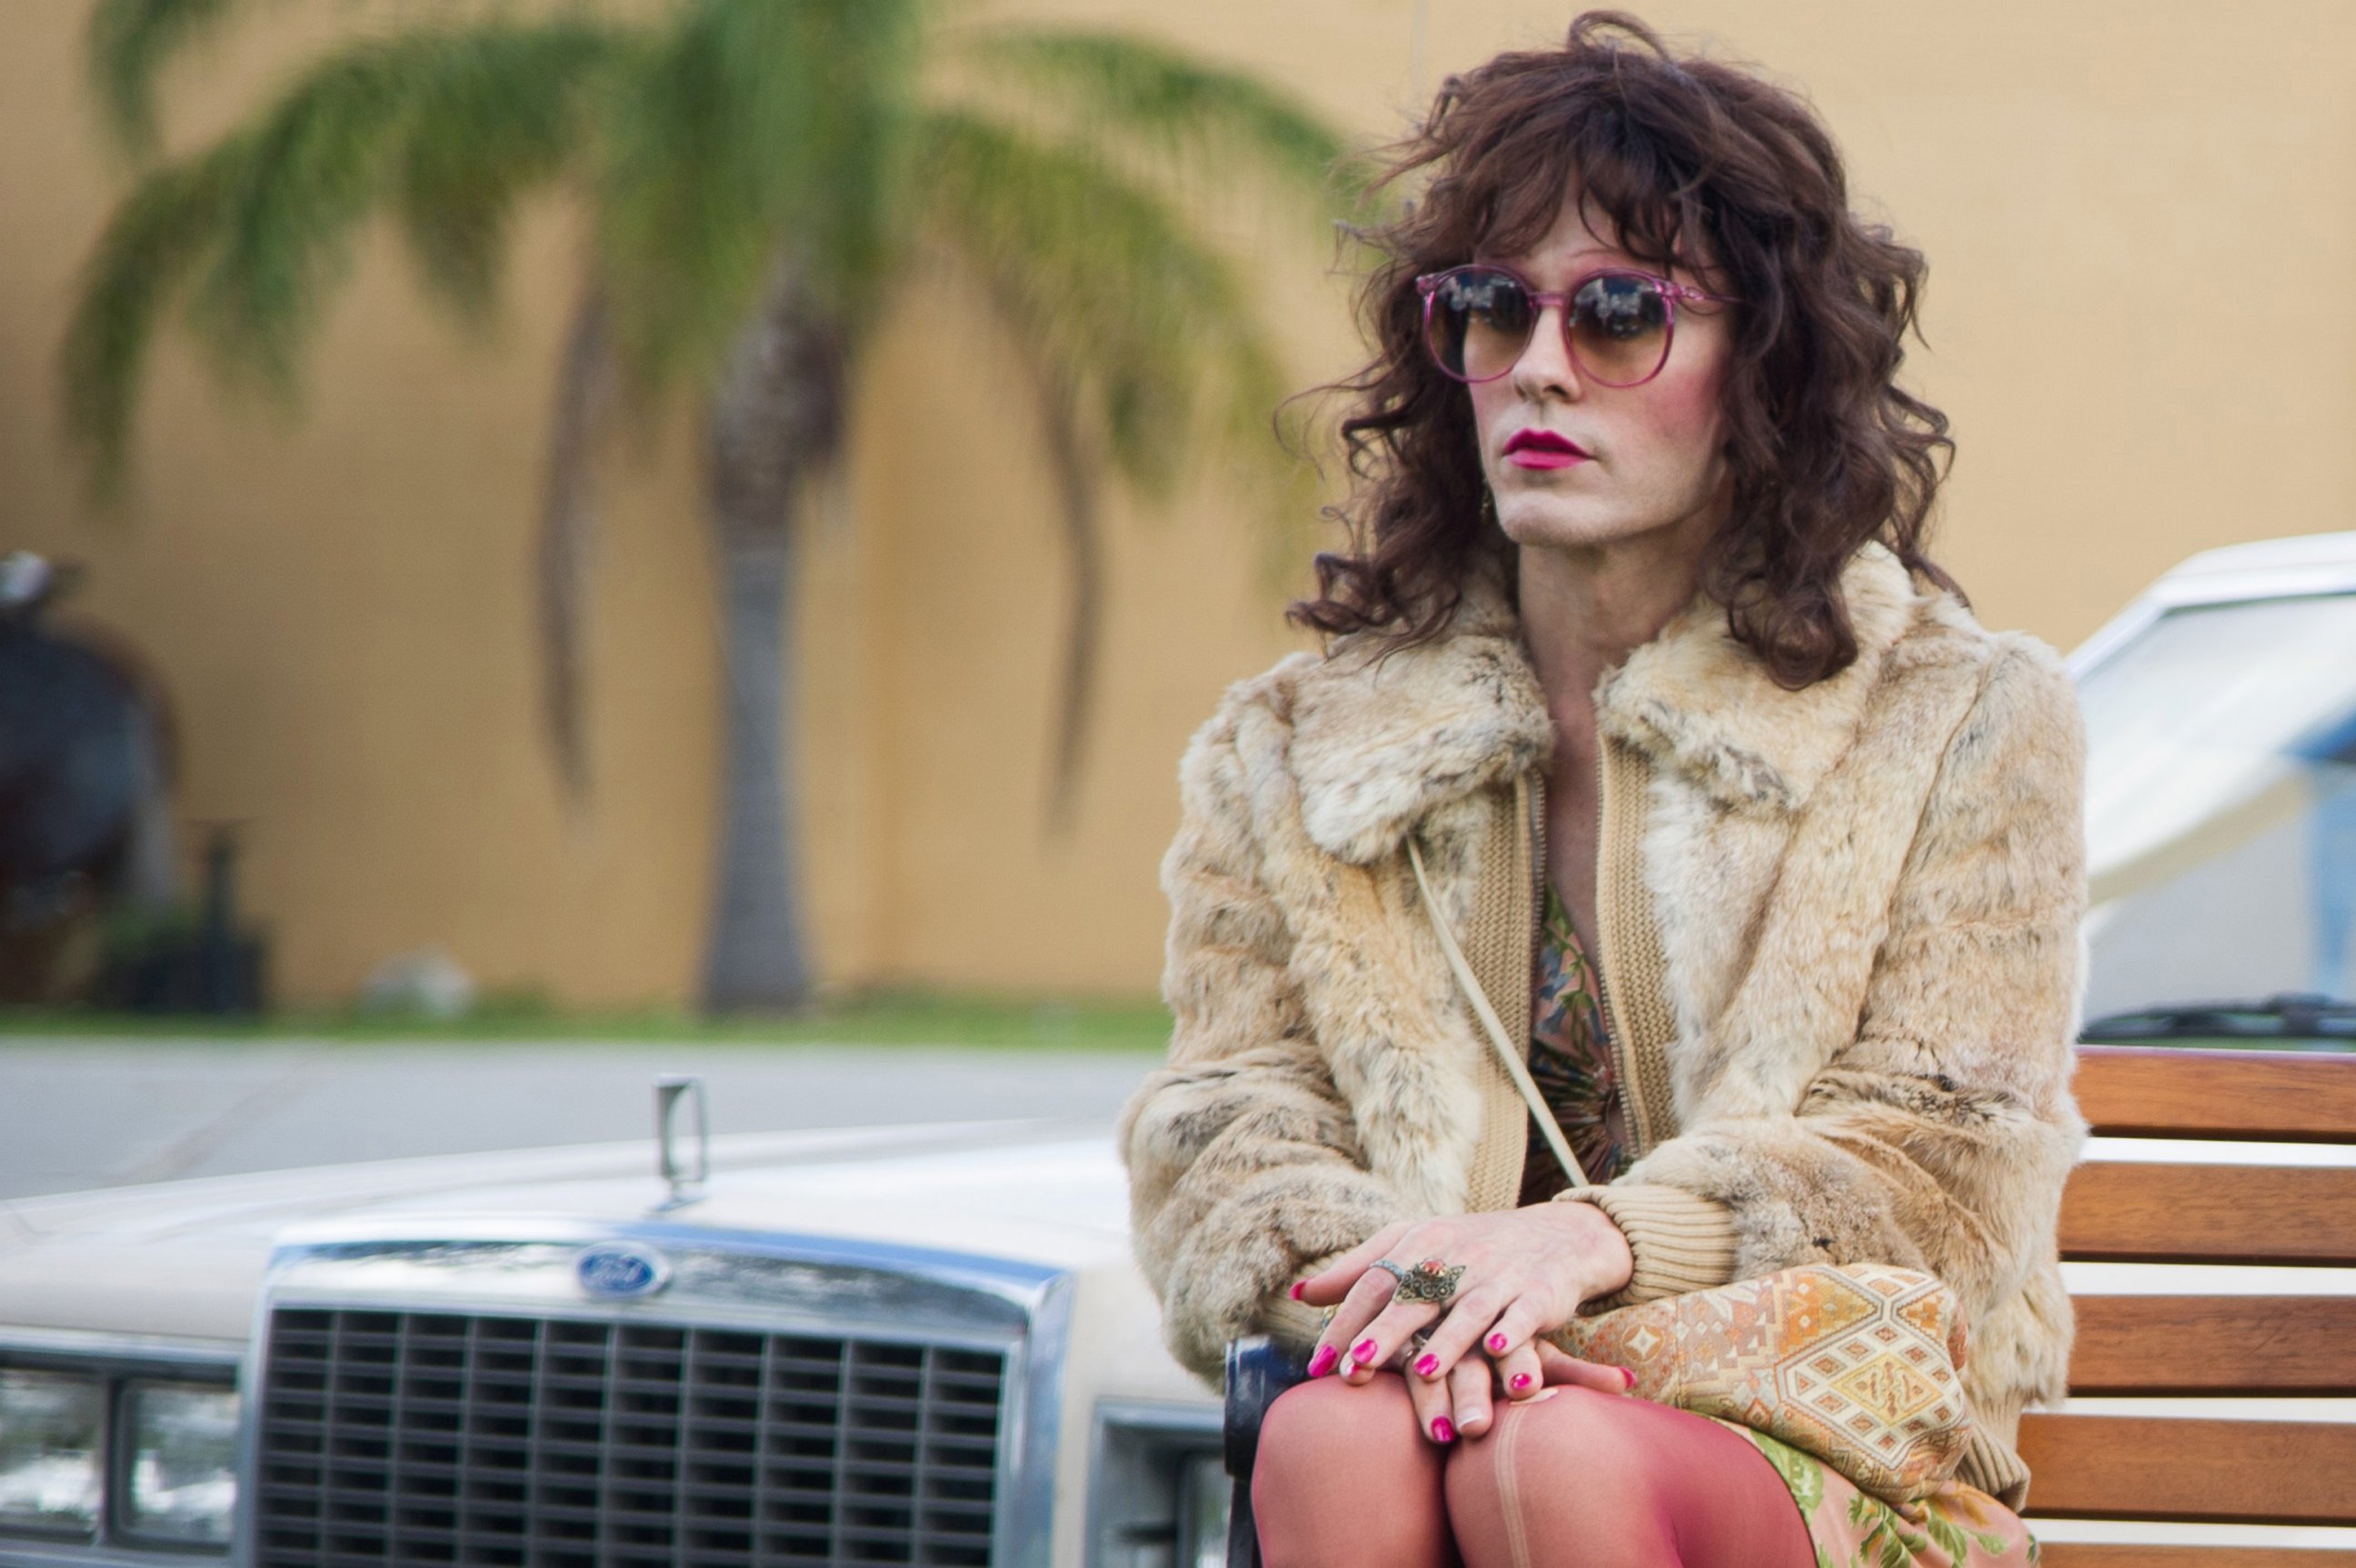 PHOTO: This image released by Focus Features shows Jared Leto as Rayon in a scene from "Dallas Buyers Club."